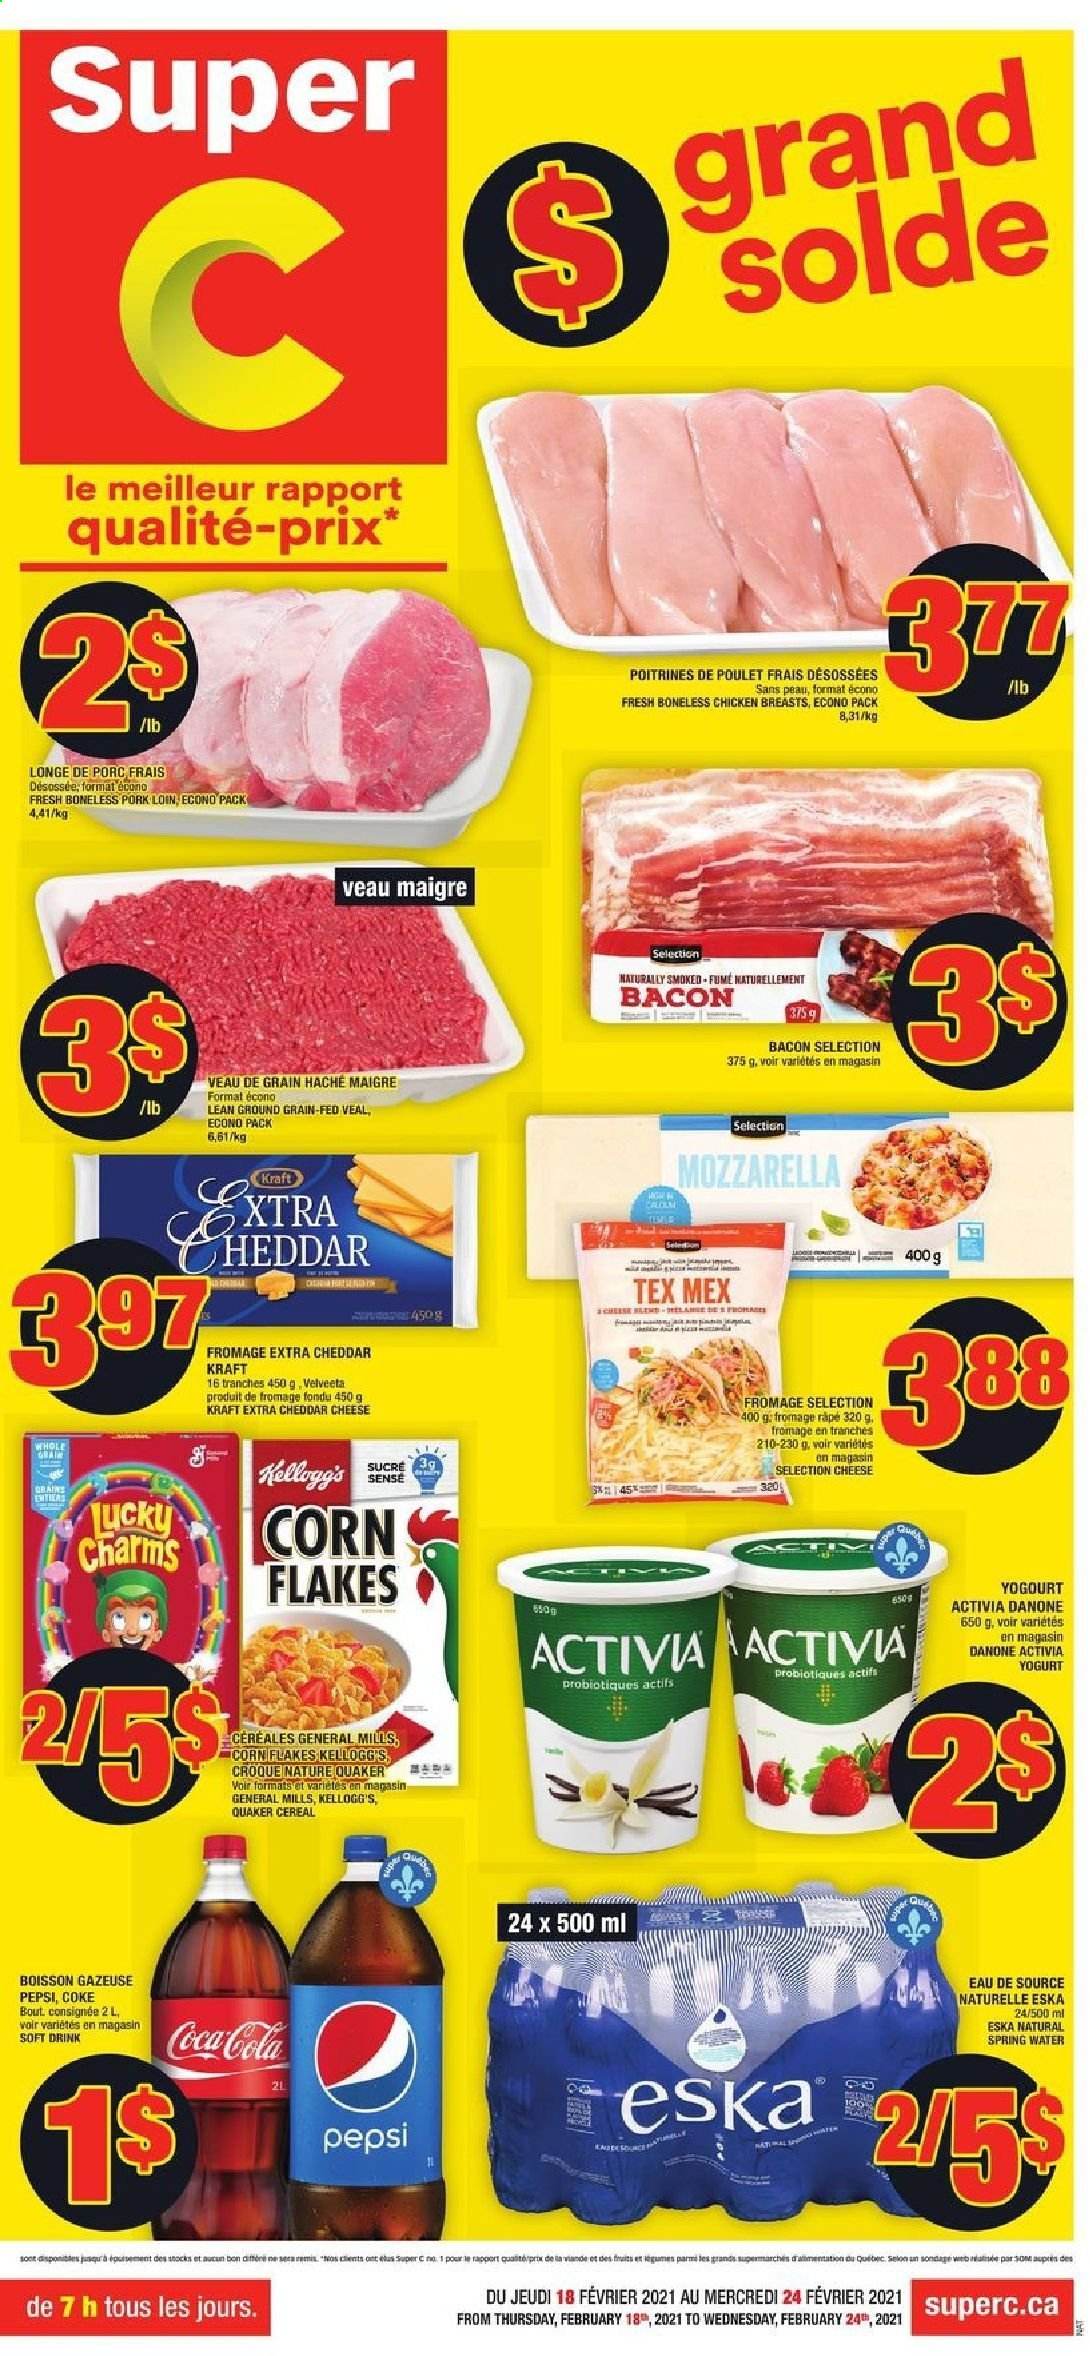 thumbnail - Super C Flyer - February 18, 2021 - February 24, 2021 - Sales products - Quaker, Kraft®, bacon, cheddar, cheese, yoghurt, Activia, Kellogg's, cereals, corn flakes, Coca-Cola, Pepsi, soft drink, spring water, chicken breasts, pork loin, pork meat, Danone, mozzarella. Page 1.